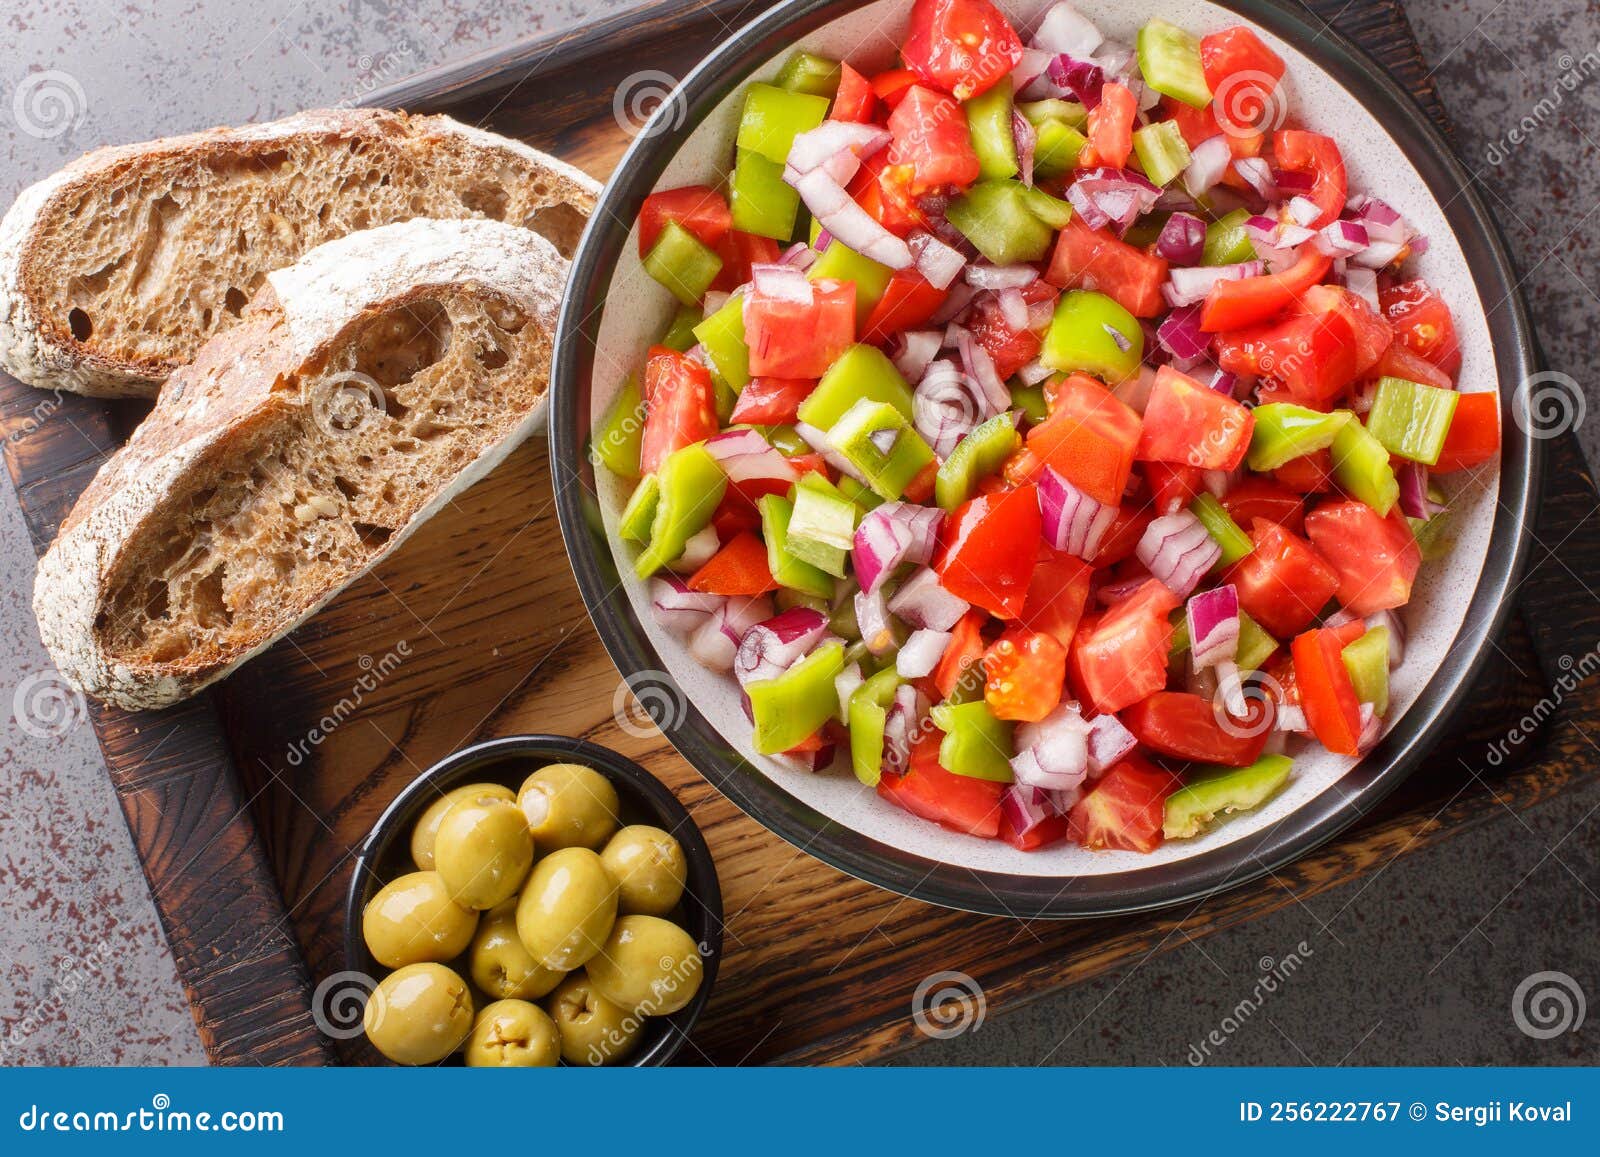 trampo ensalada salad made with tomatoes, peppers, and onions served with olive and bread closeup on the wooden board. horizontal